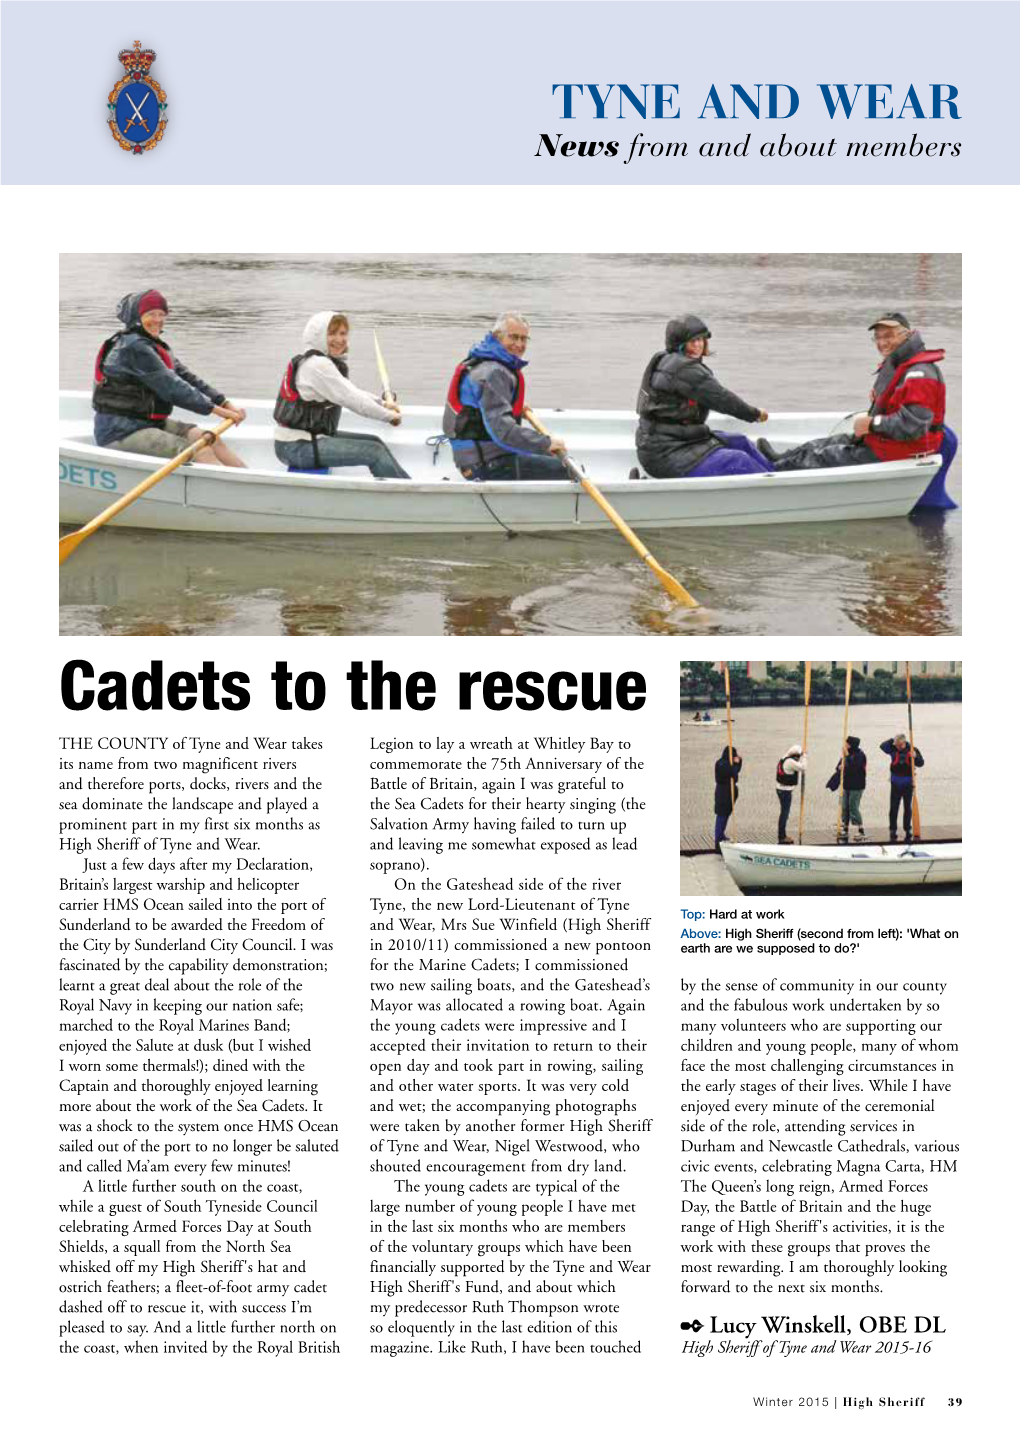 Cadets to the Rescue